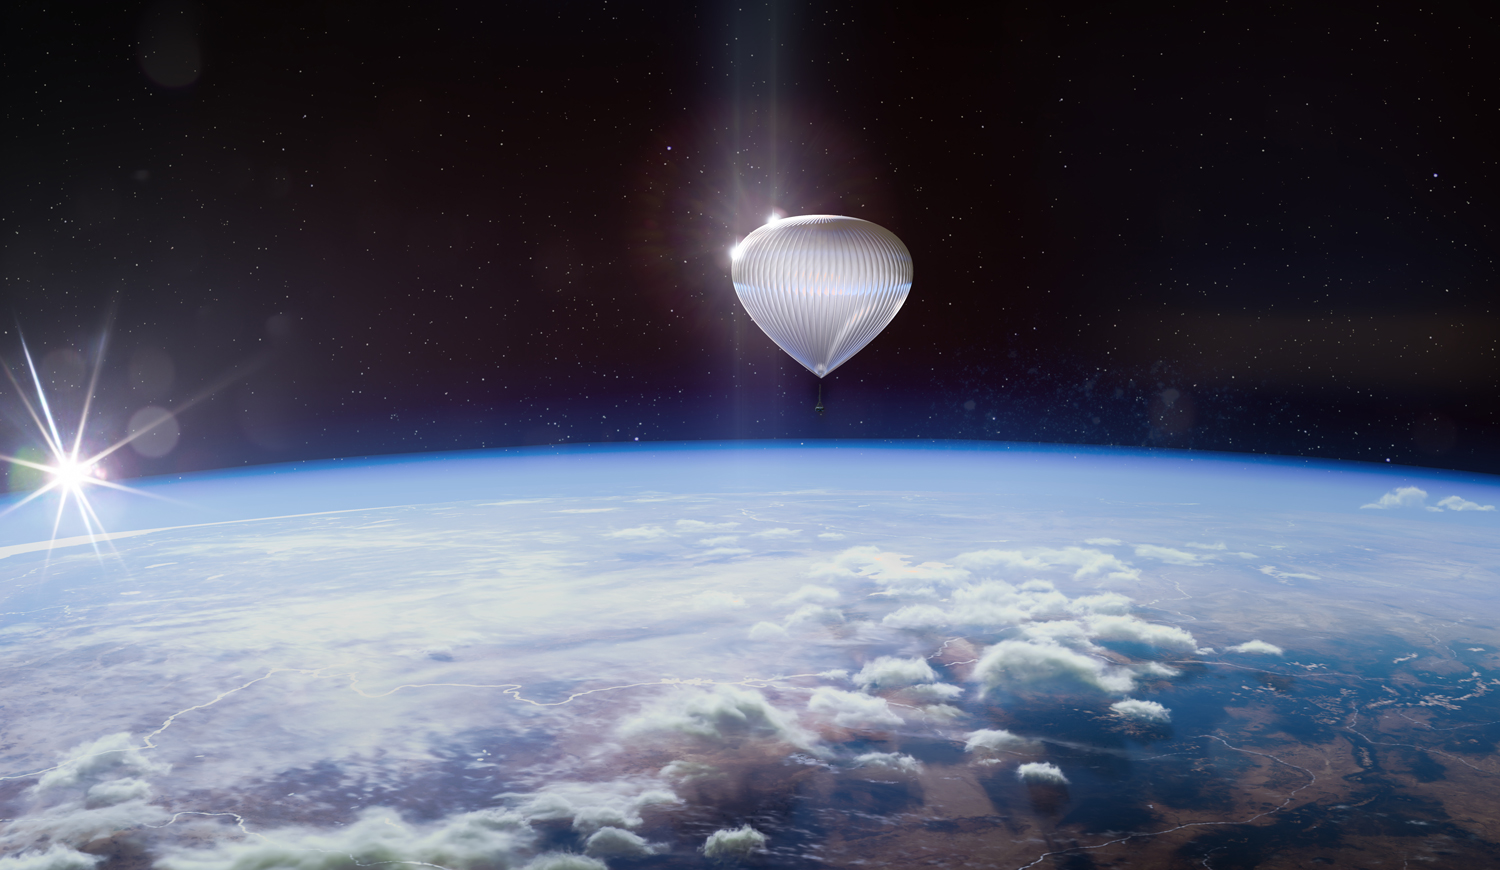 A stratospheric hot air balloon is in space with Earth visible below.